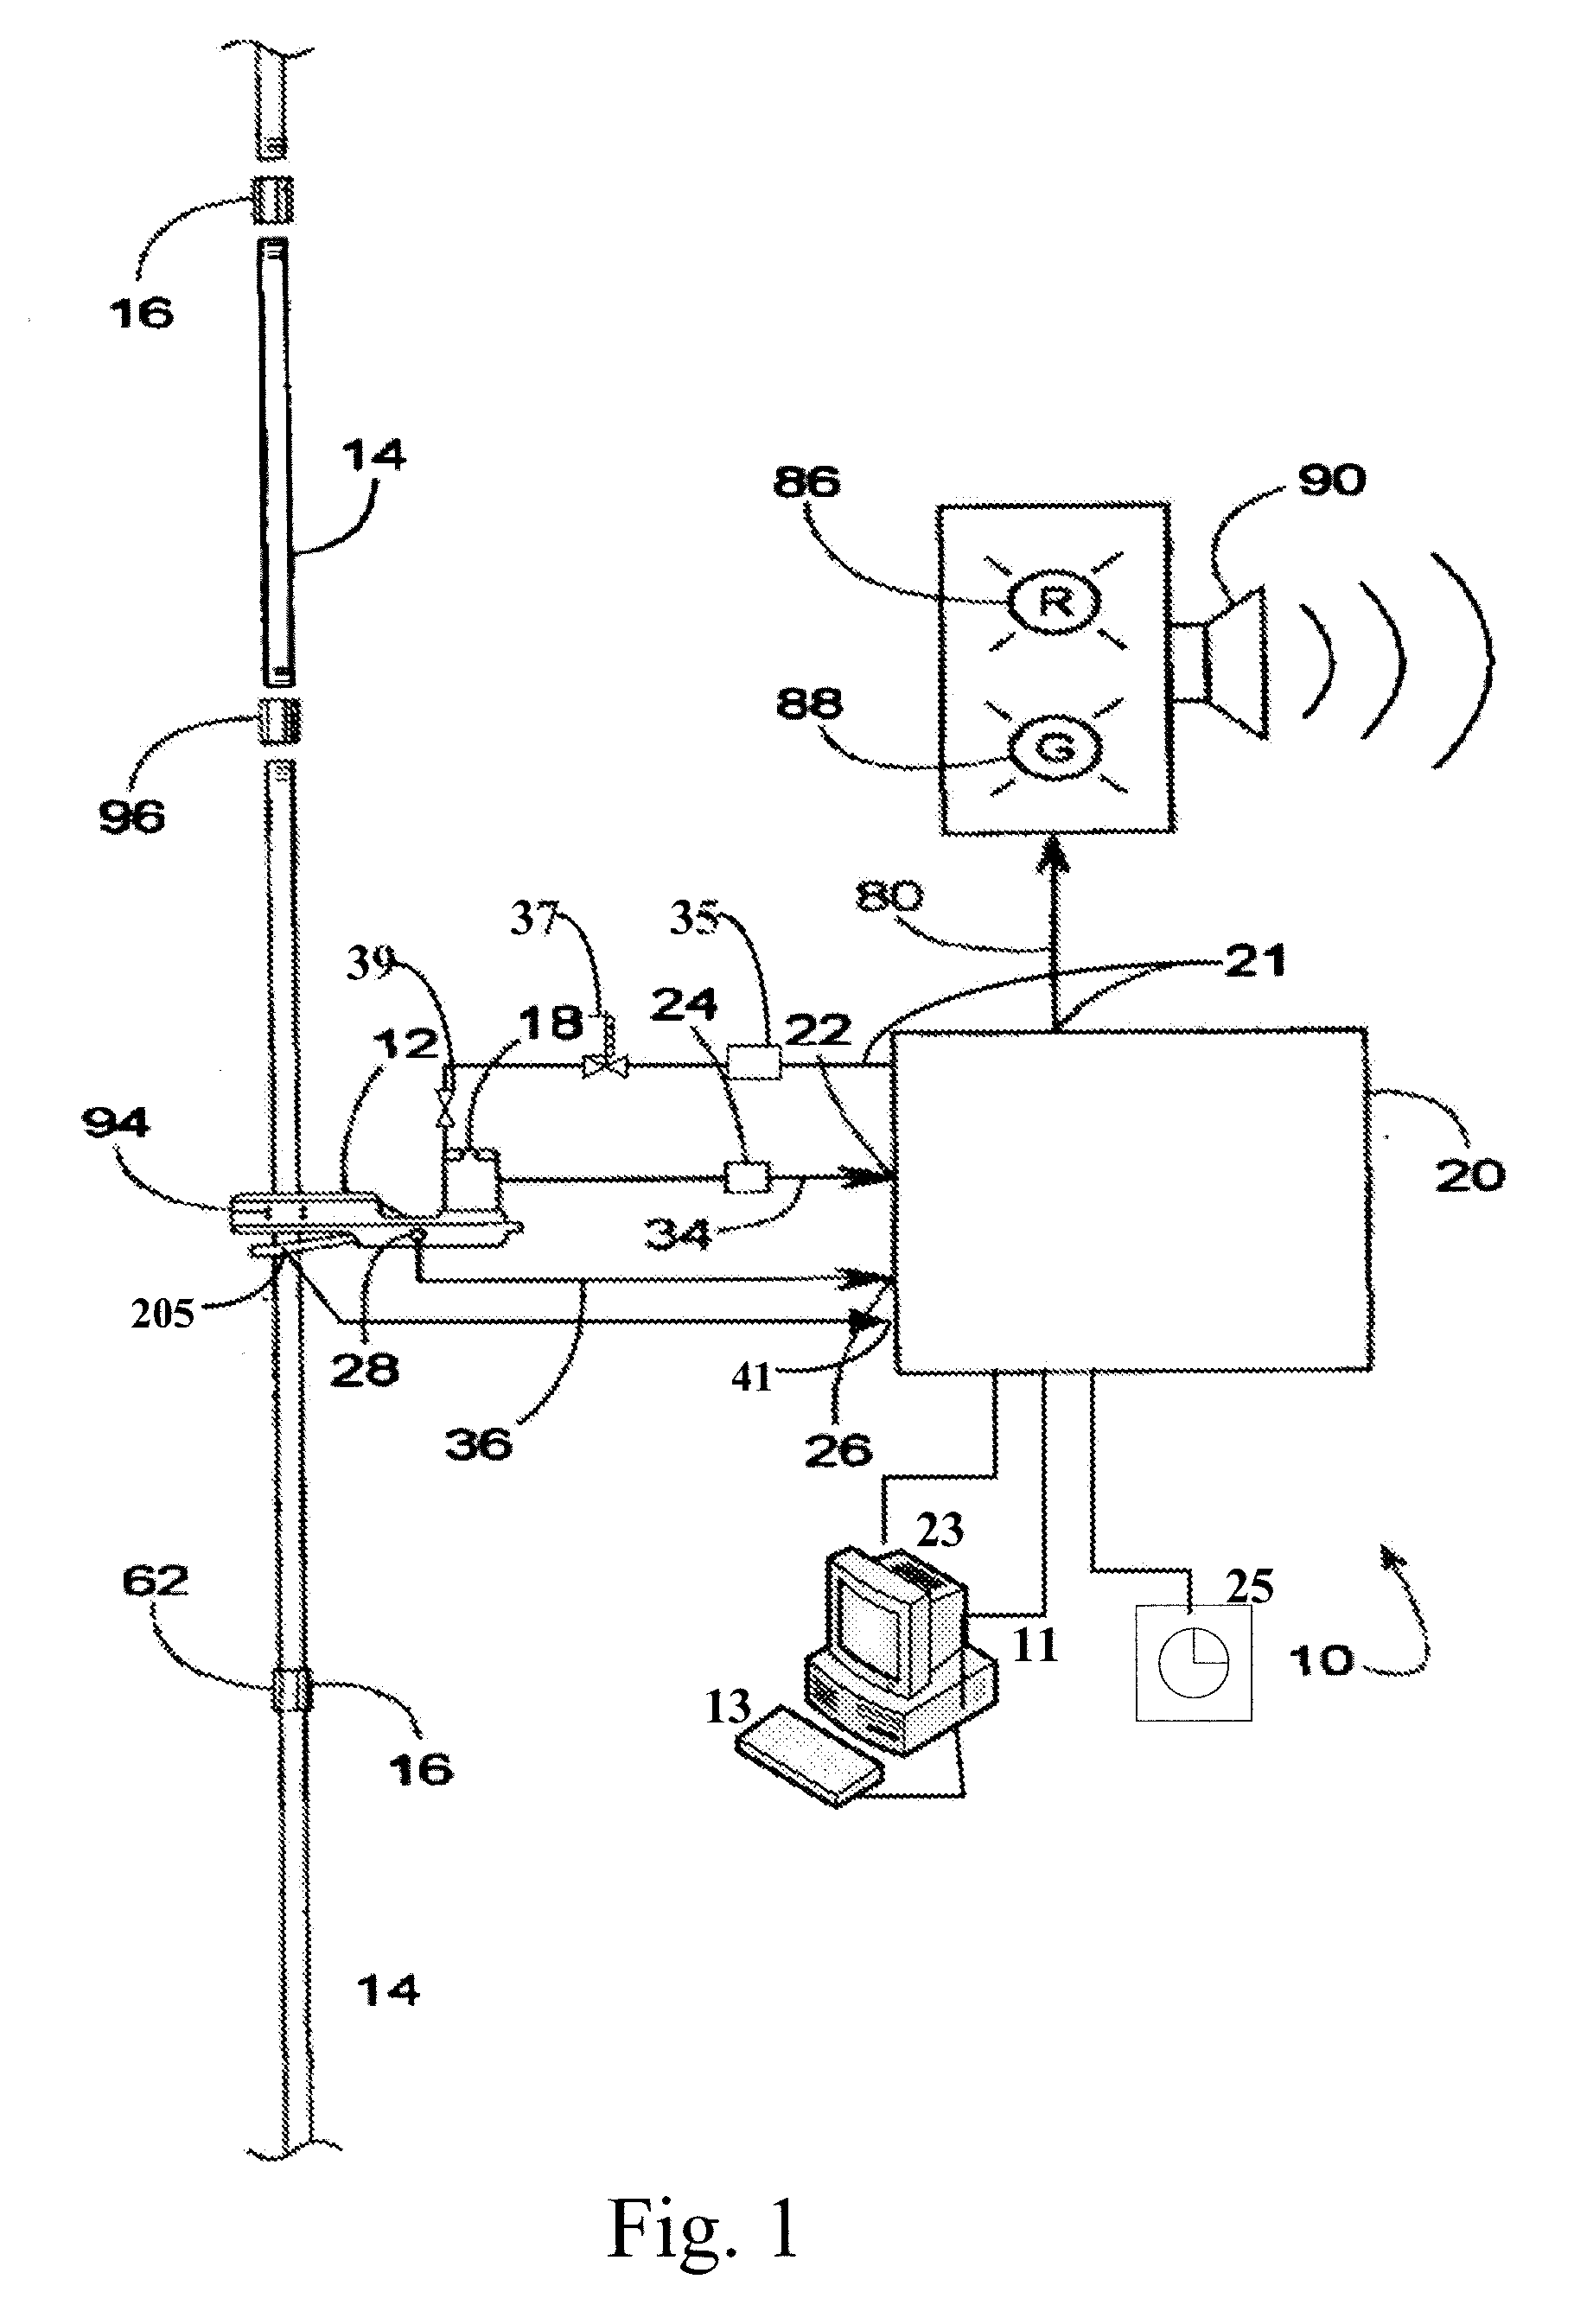 Method and System for Monitoring the Efficiency and Health of a Hydraulically Driven System